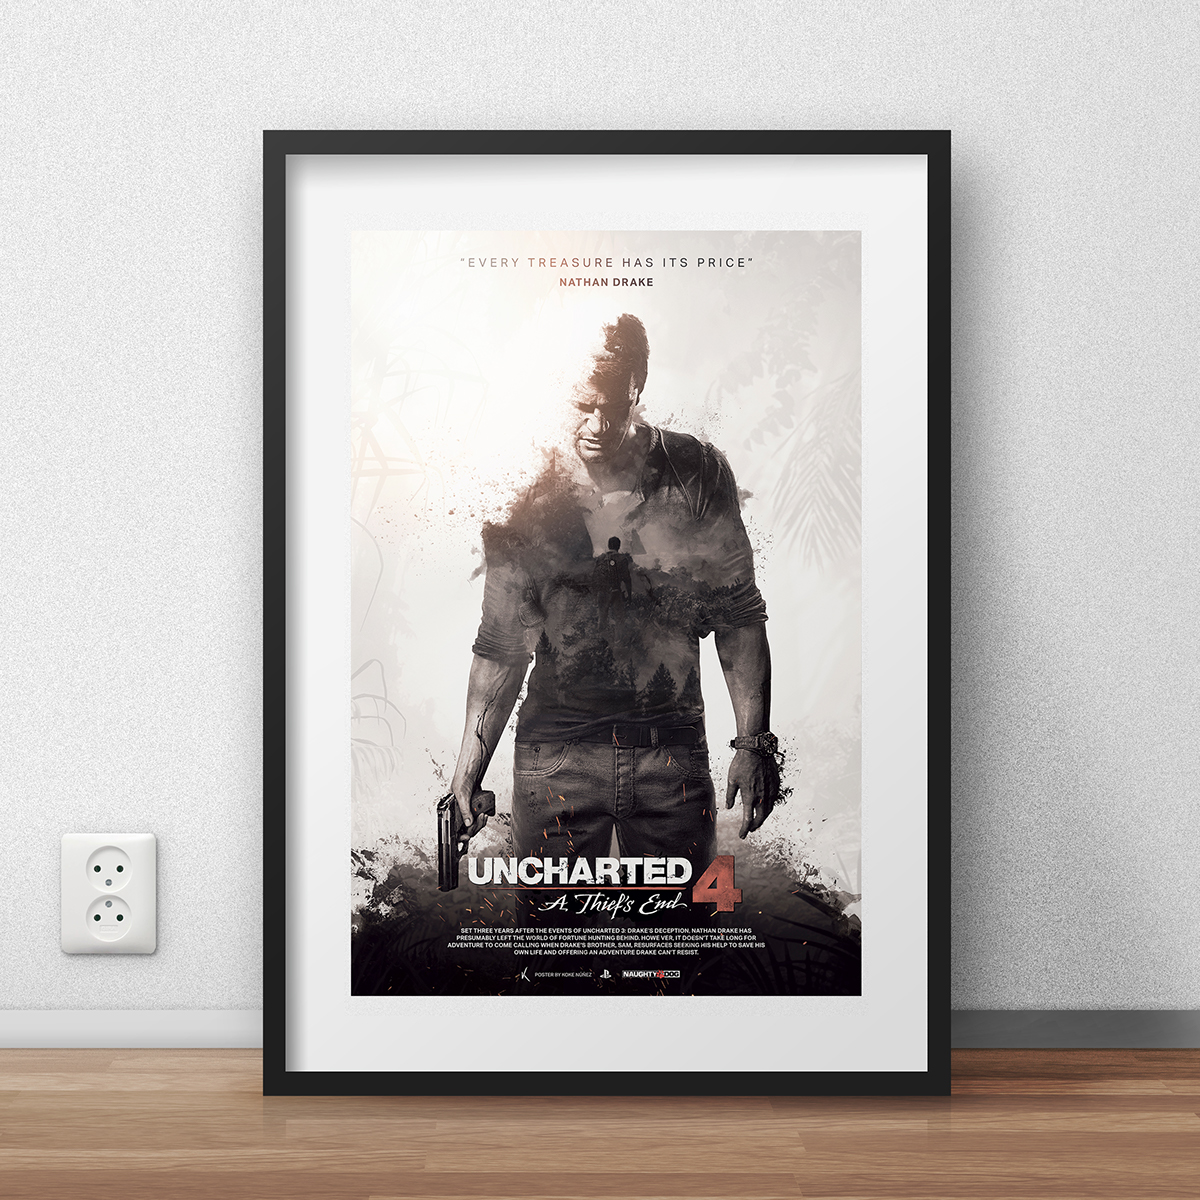 uncharted Ps4 poster cartel A Thief's End U4 Uncharted 4 naughty dog ND unofficial fan fan poster photomanipulation